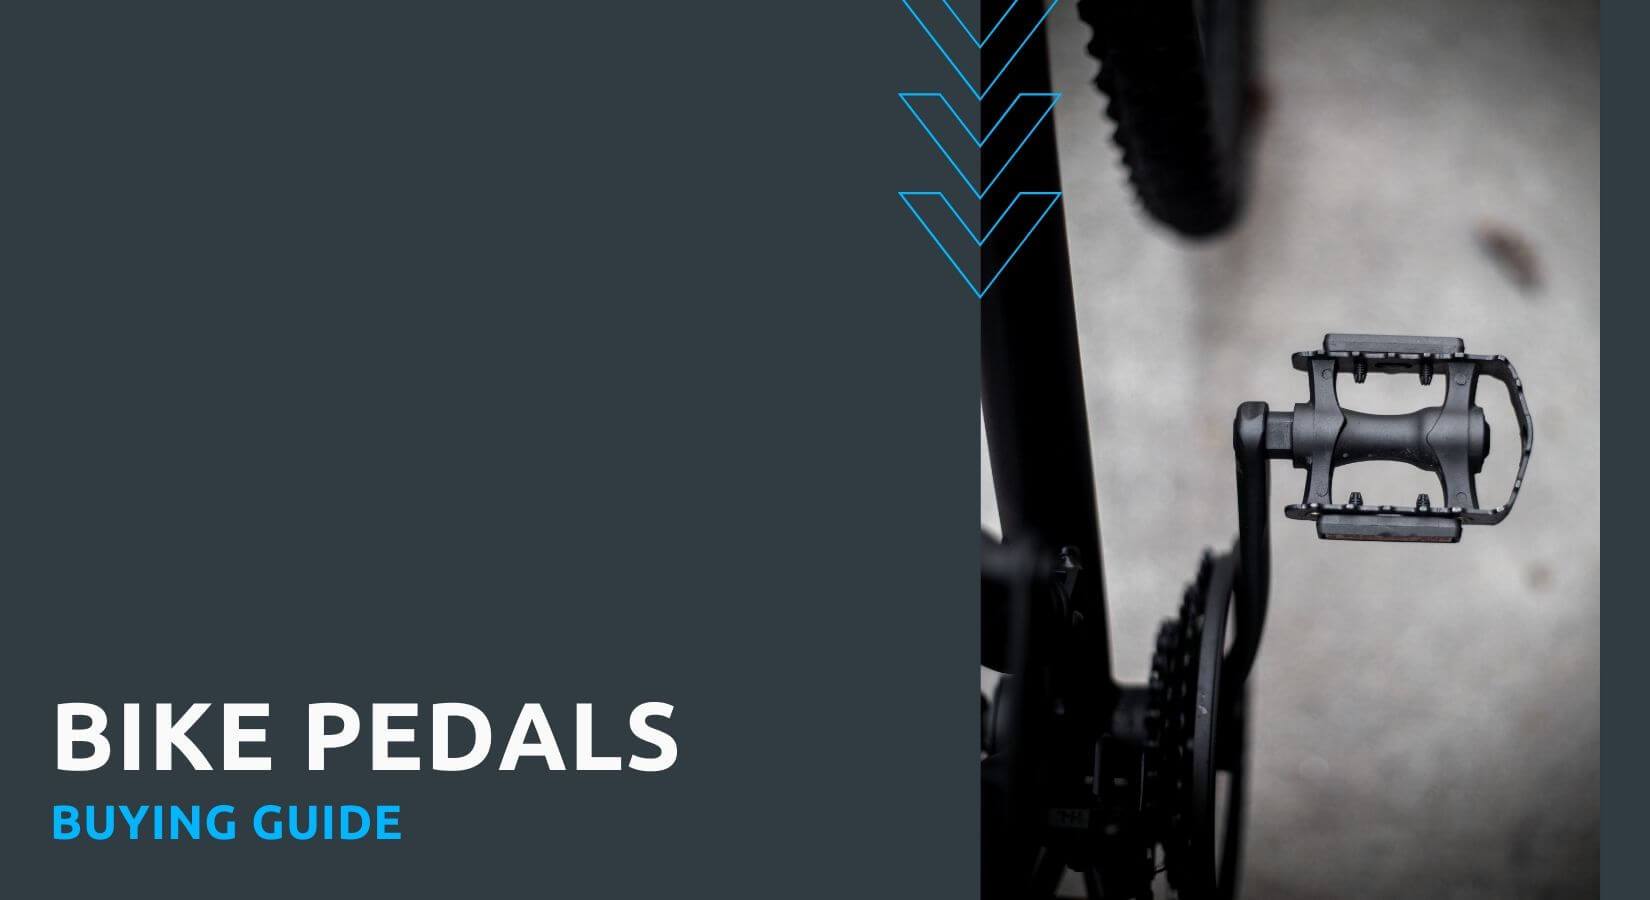 Bike Pedals Buying Guide